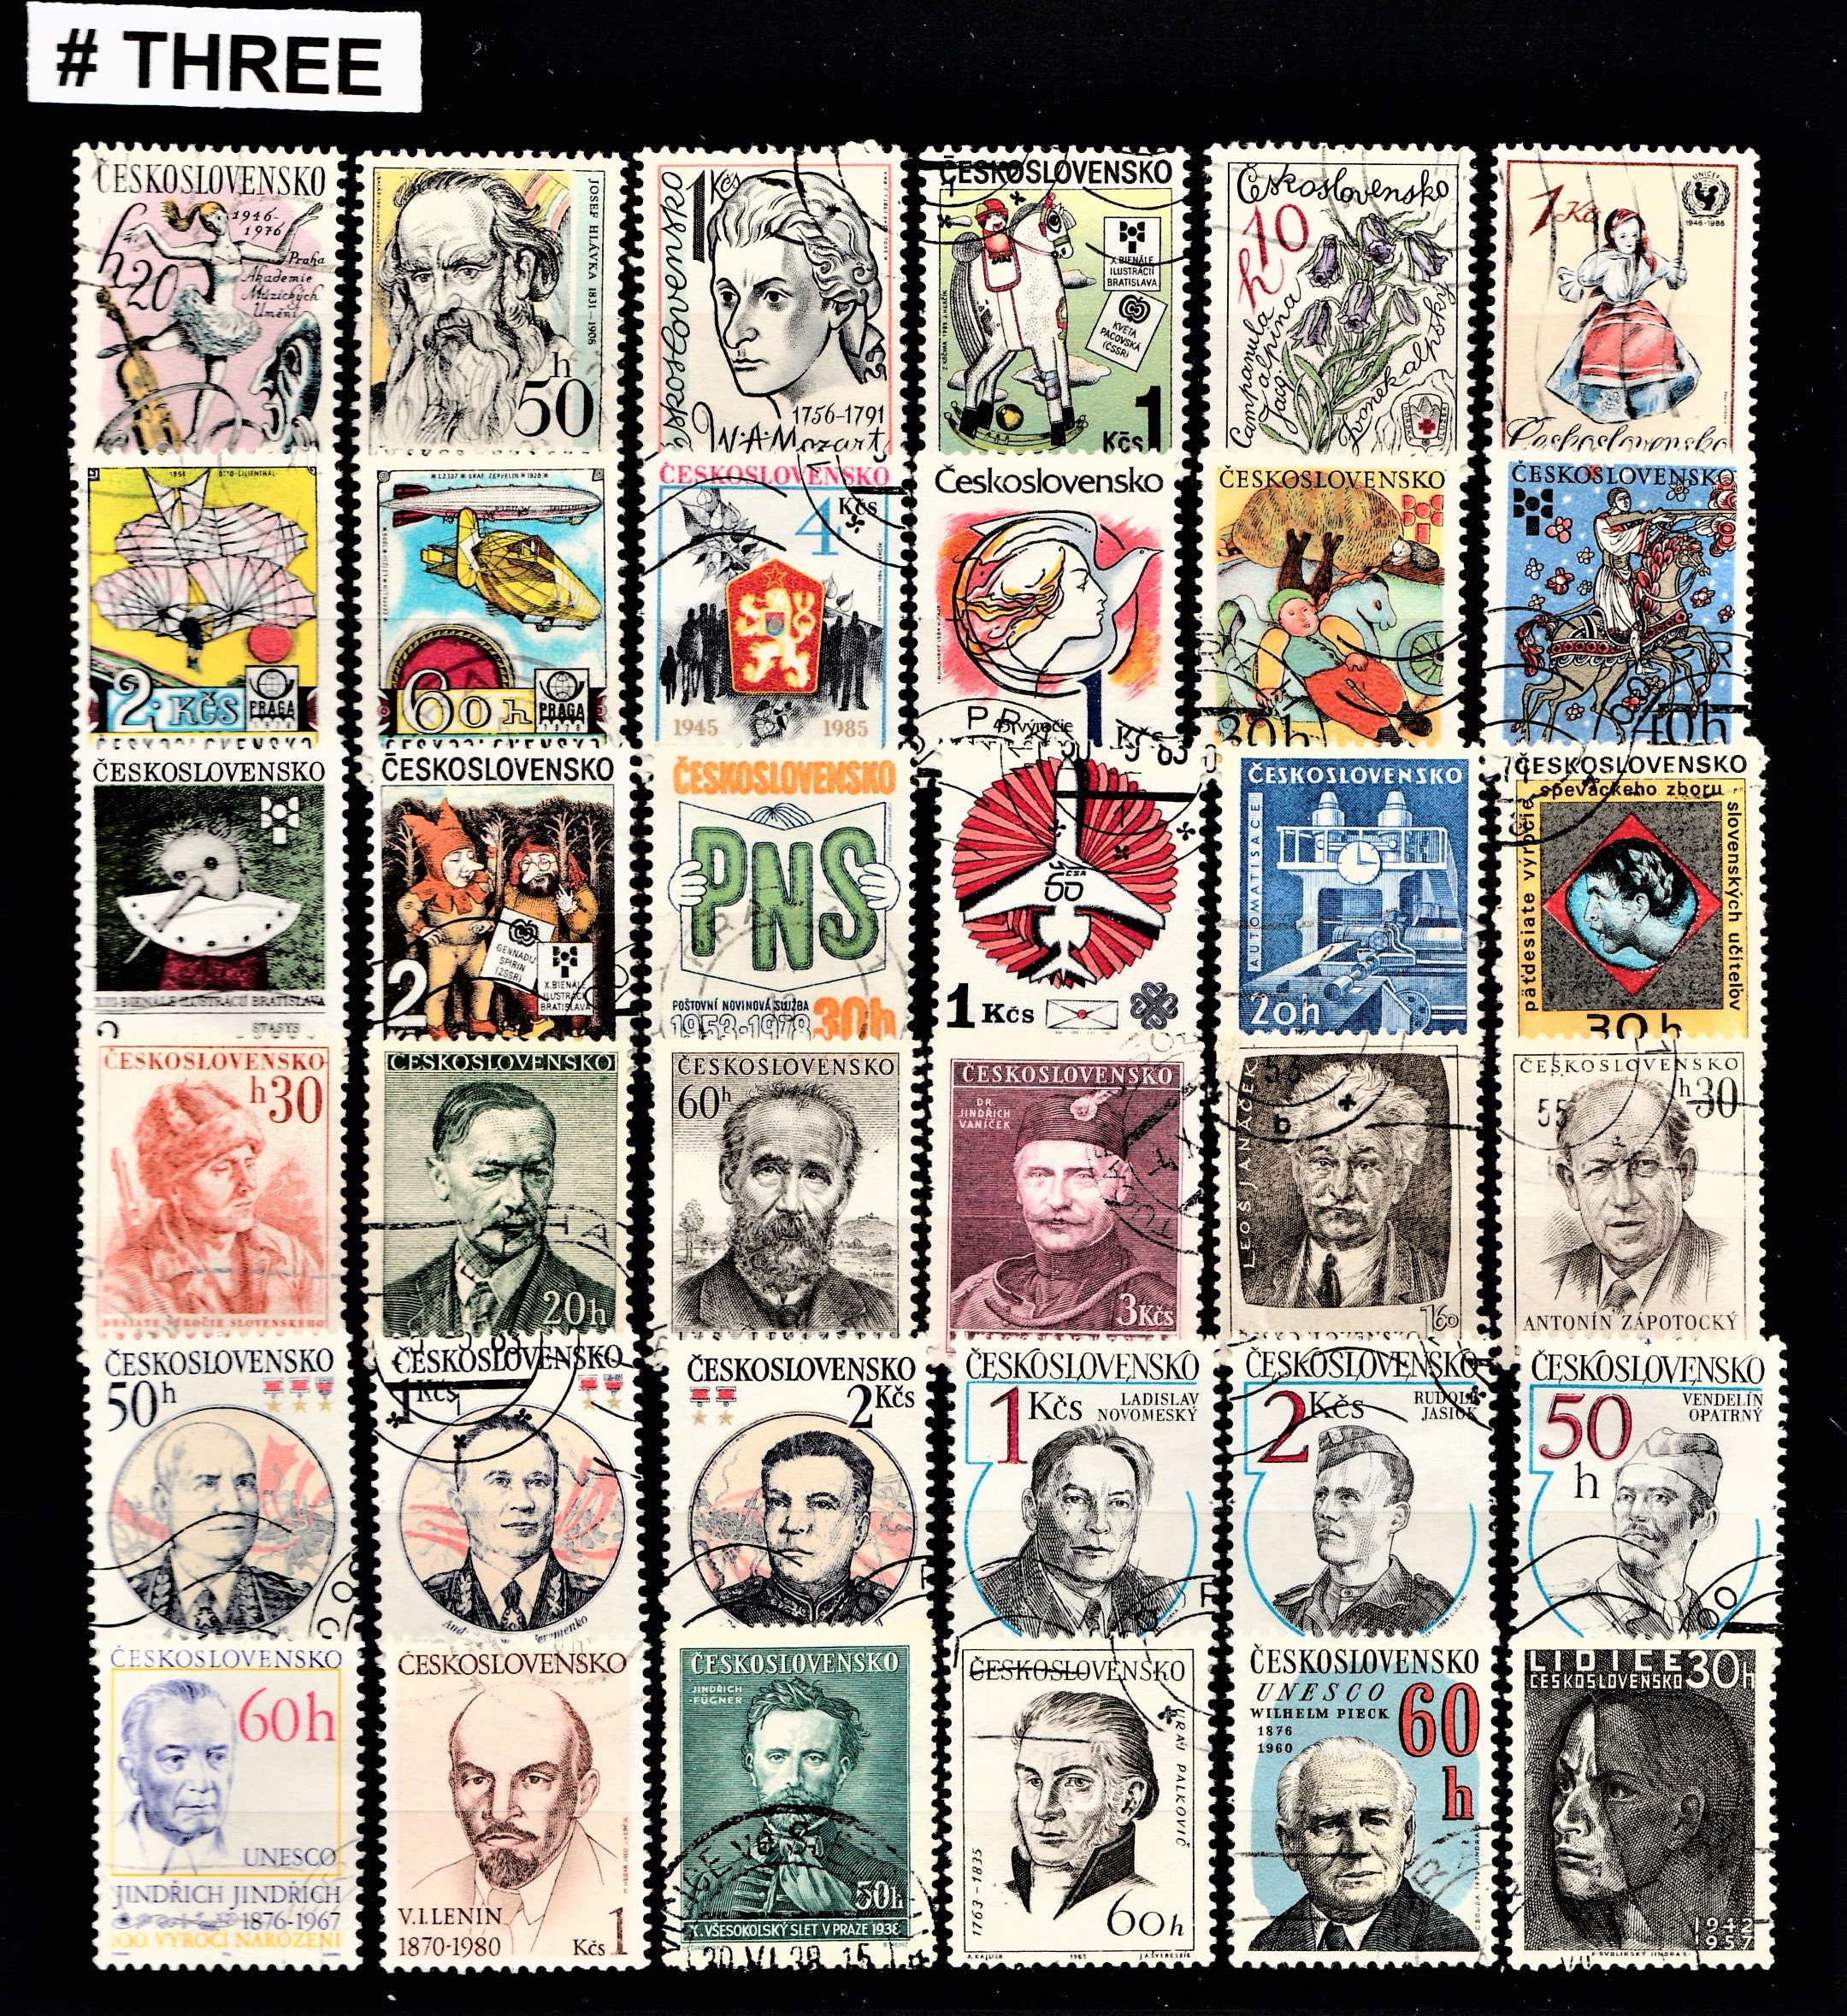 WOMEN in History and Art 45 Postage Stamps Vintage Worldwide